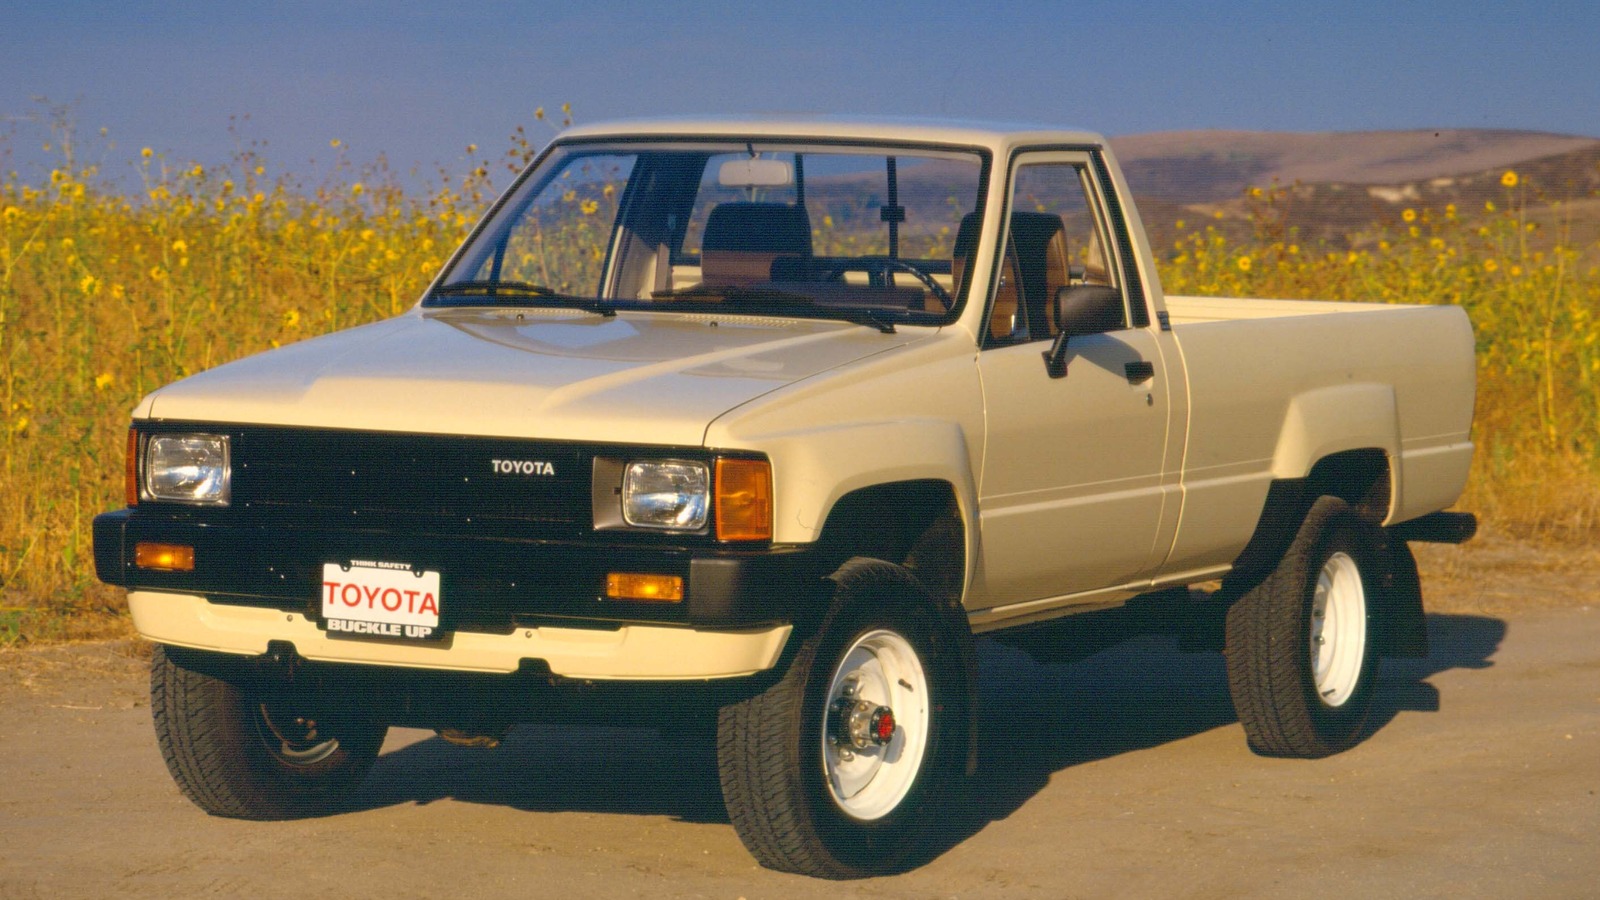 Is The 4th Gen Toyota Hilux Really That Good? Or Is It Just Overhyped?